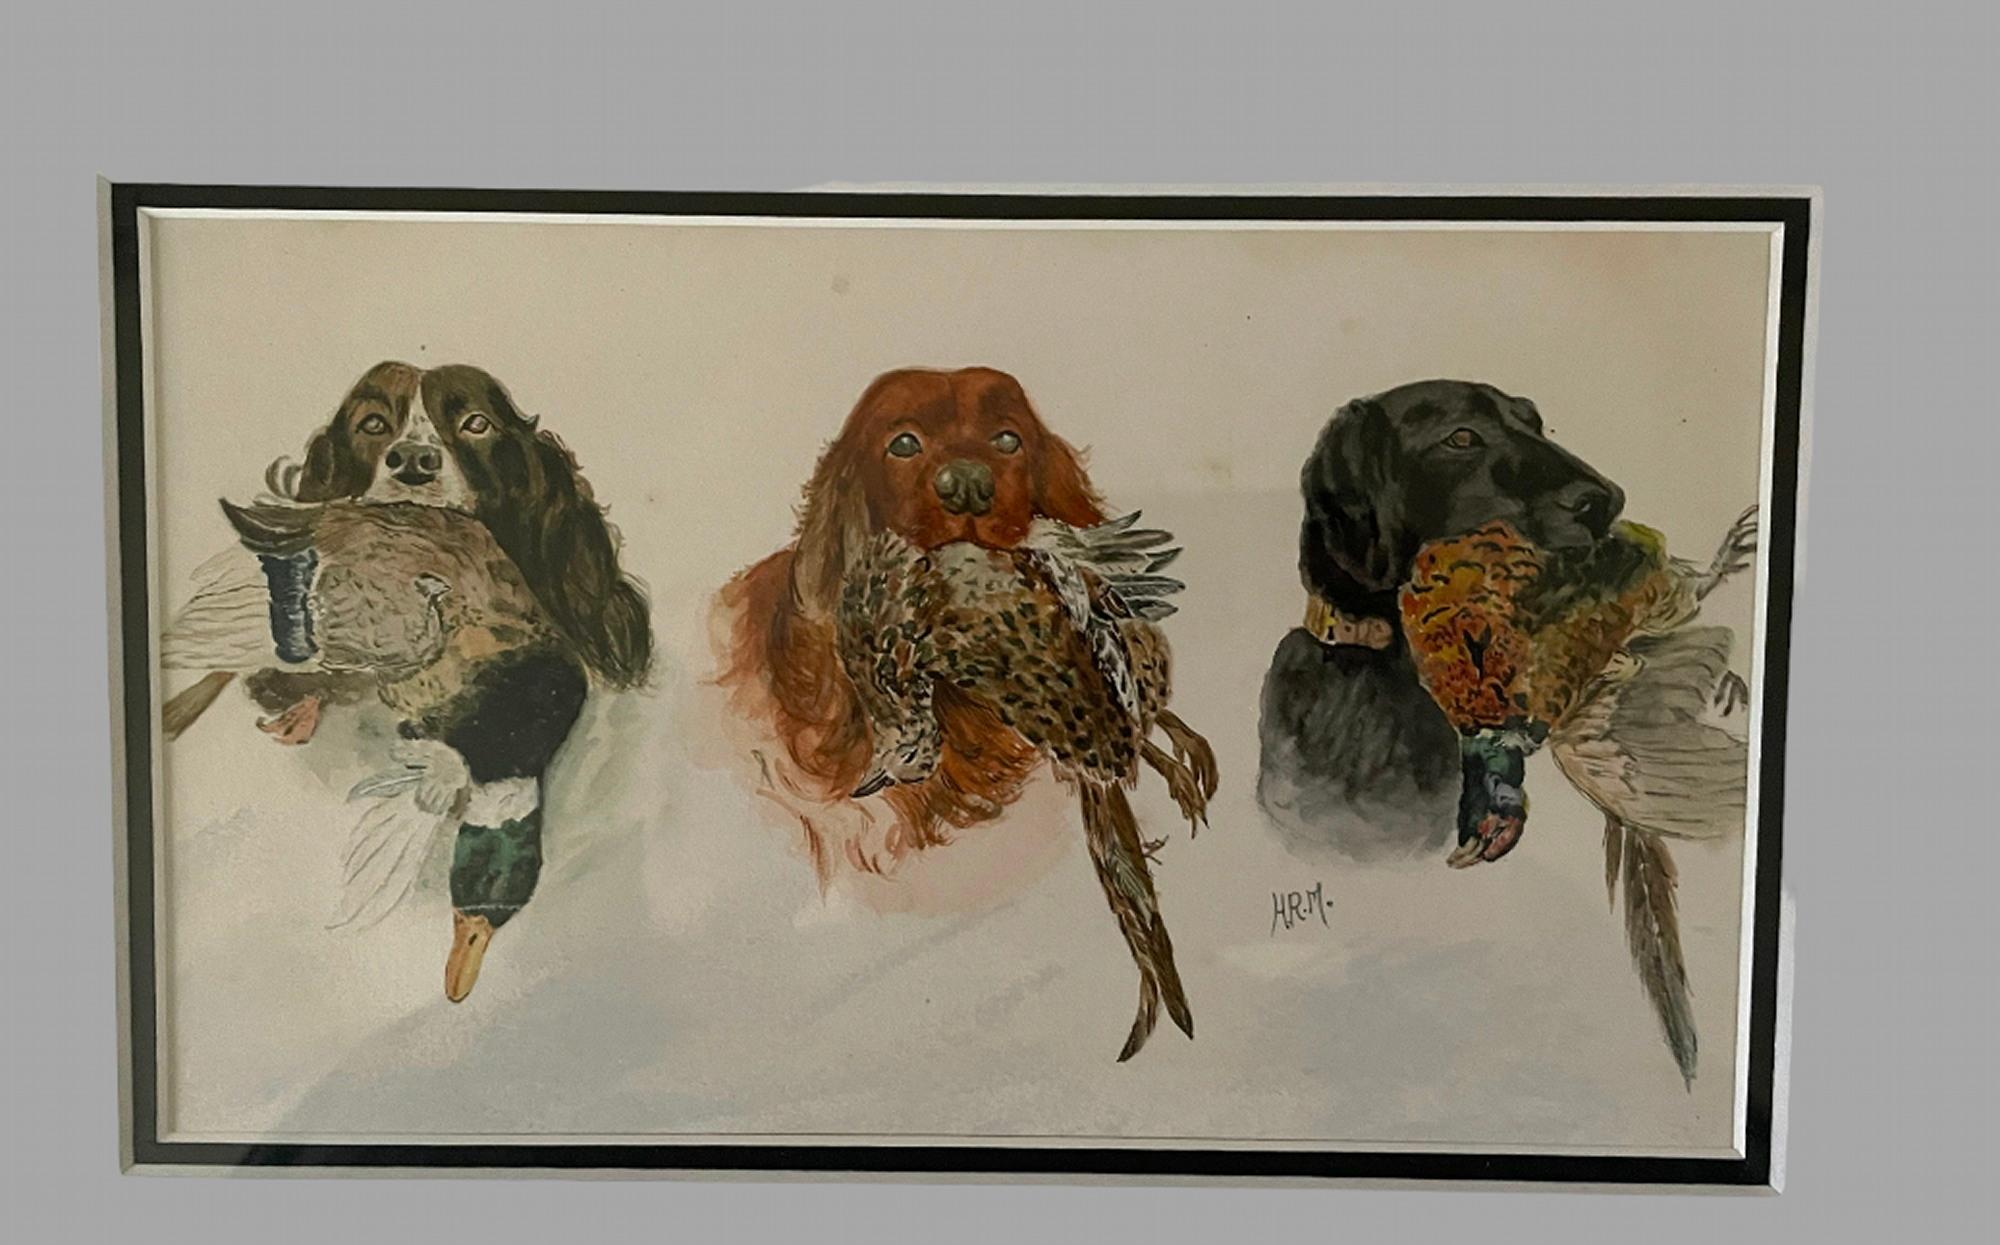 Wonderful watercolor of working dogs by Raoul Millais. Signed with Monogram HRM

Raoul Millais (1901-1999) : Born in Horsham, Sussex in 1901, Raoul Millais was the grandson of the artist Sir John Everett Millais. His early introduction to art and